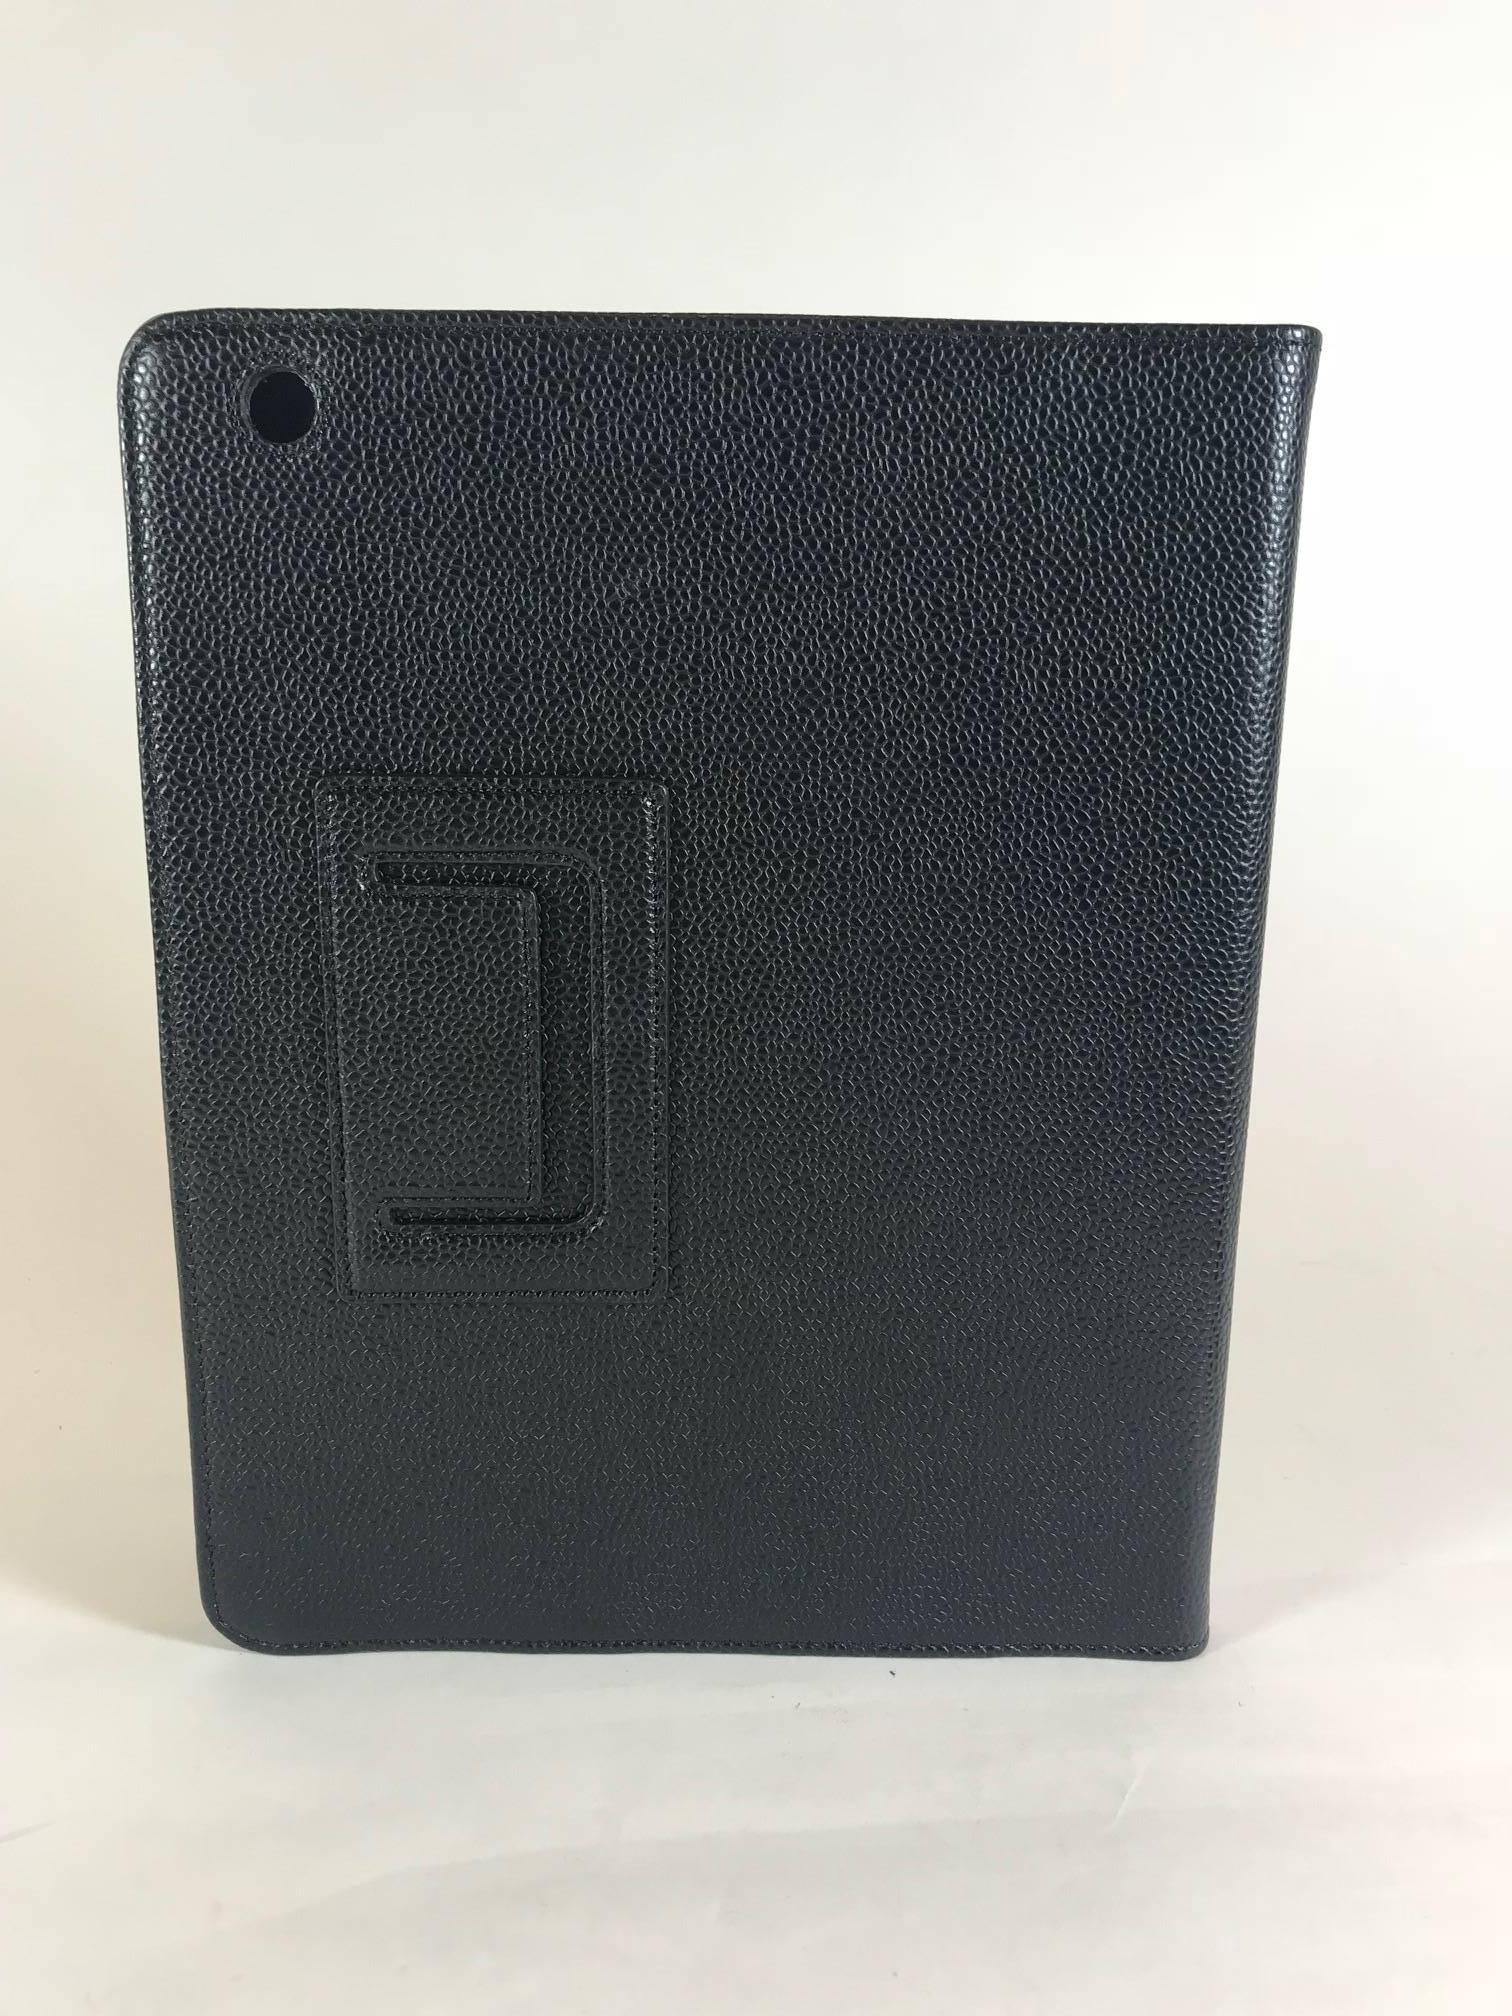 Chanel Black Ipad Case Holder In Excellent Condition In Roslyn, NY